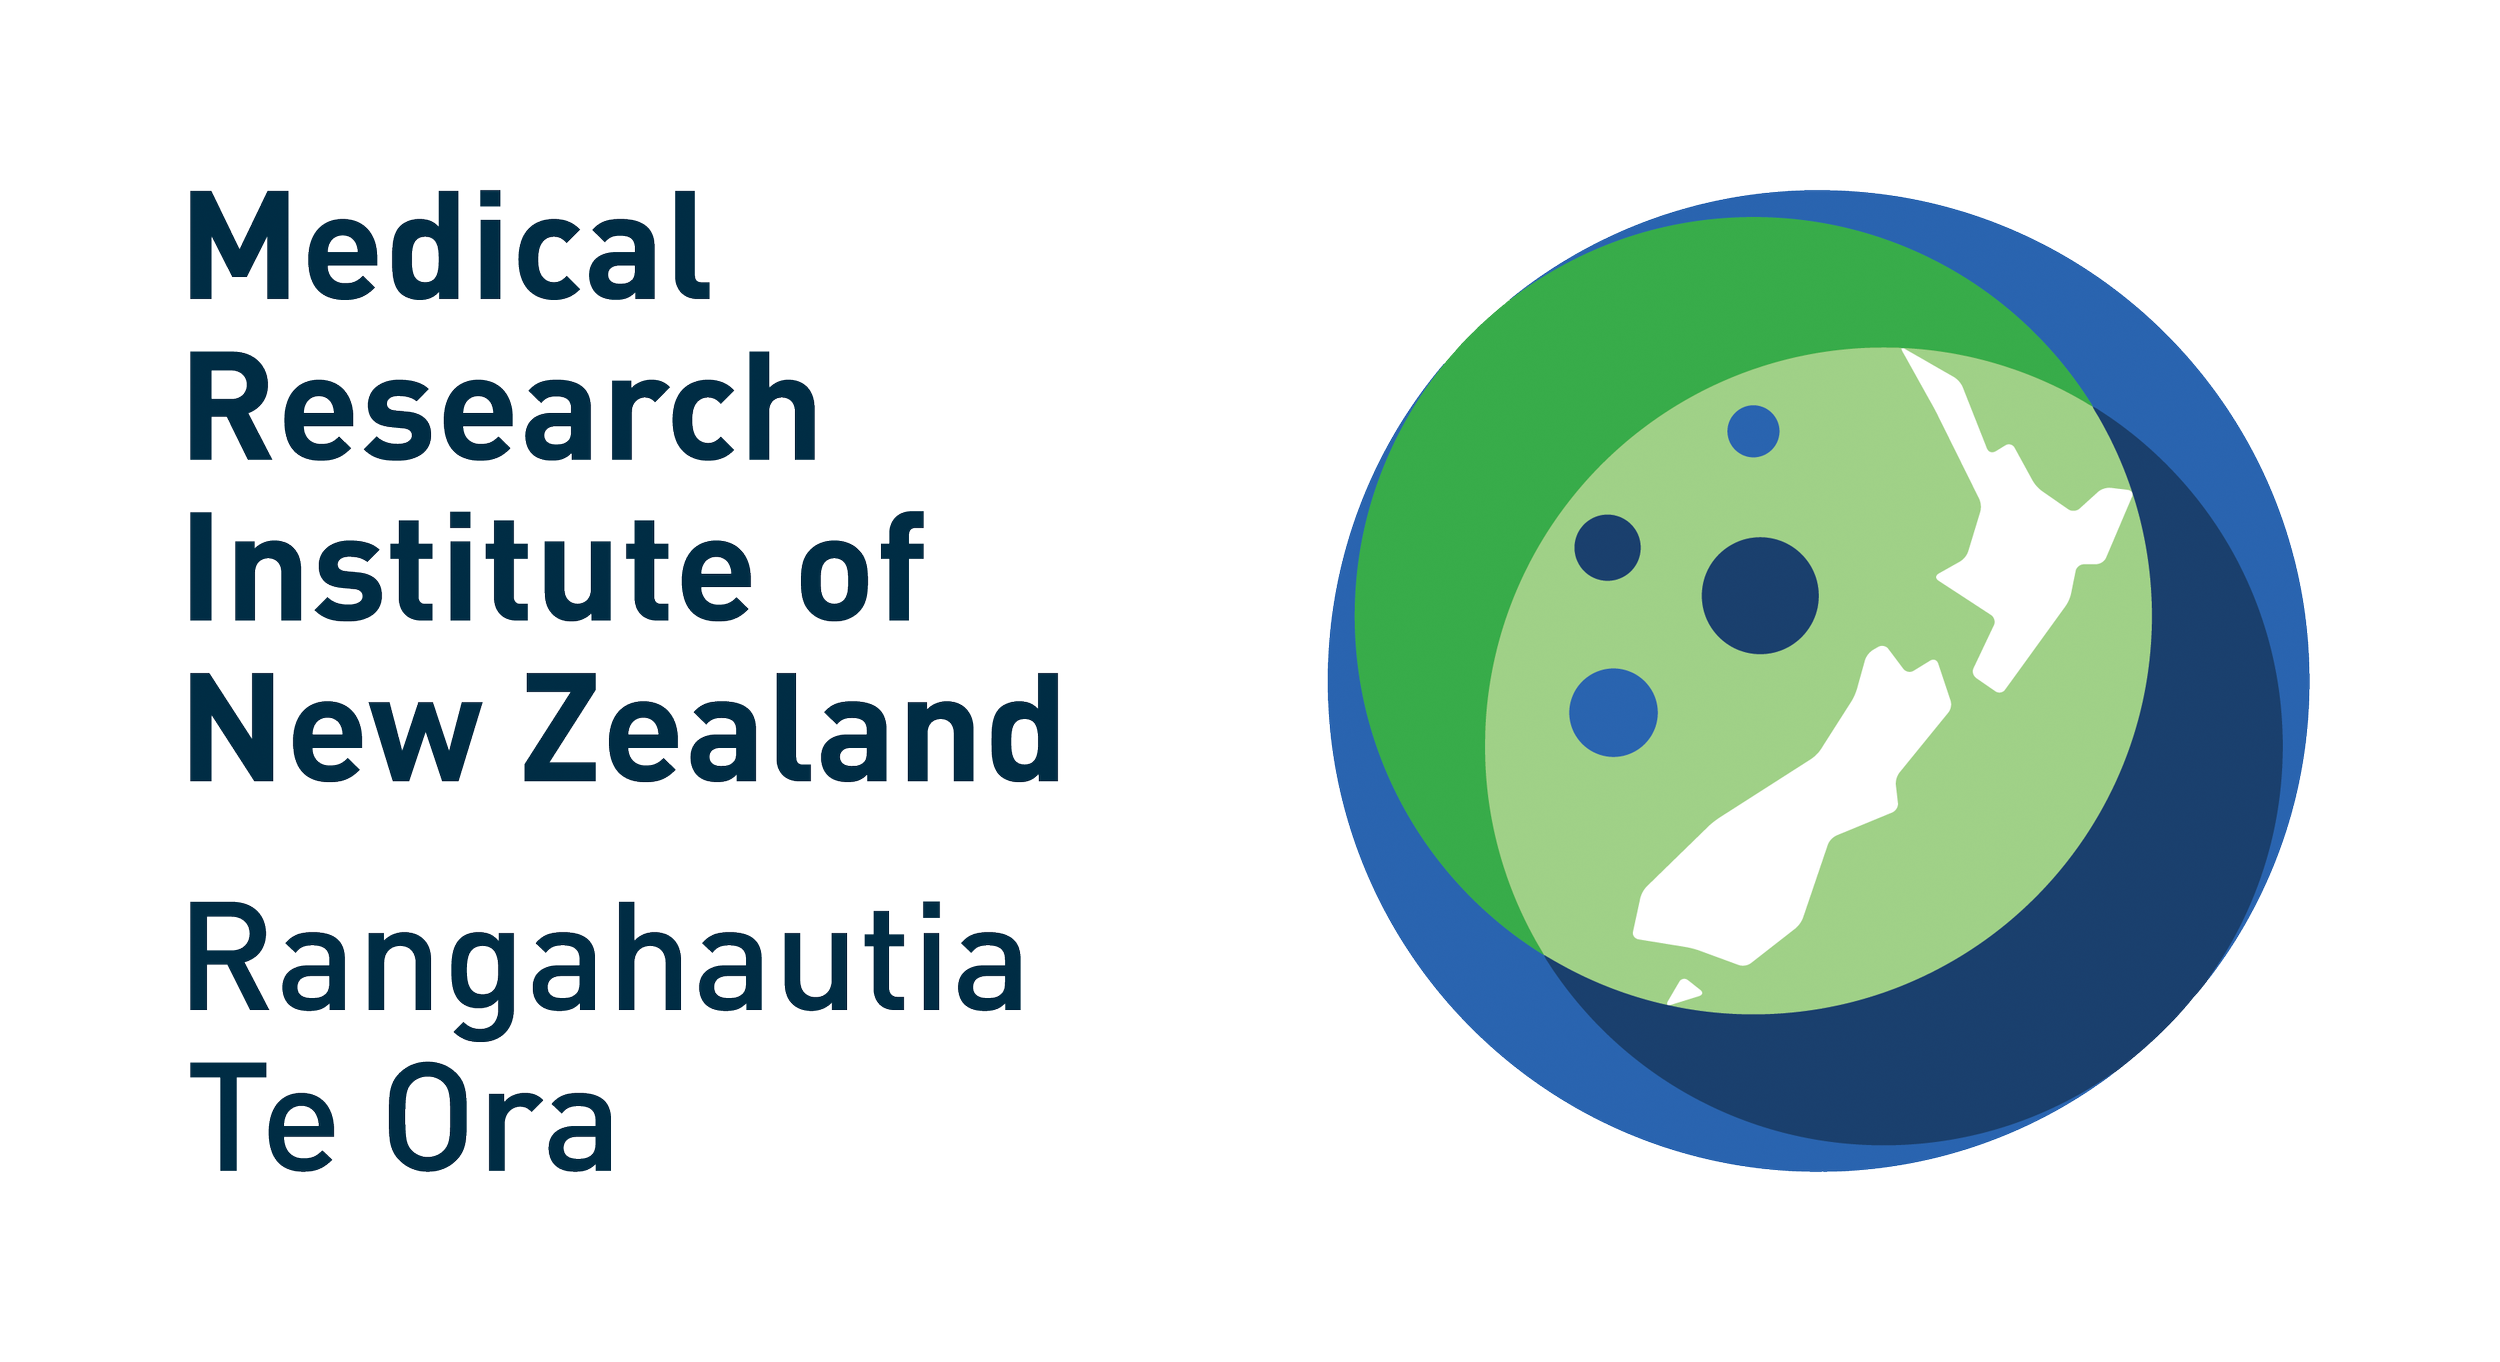 MRINZ - Medical Research Institute of New Zealand